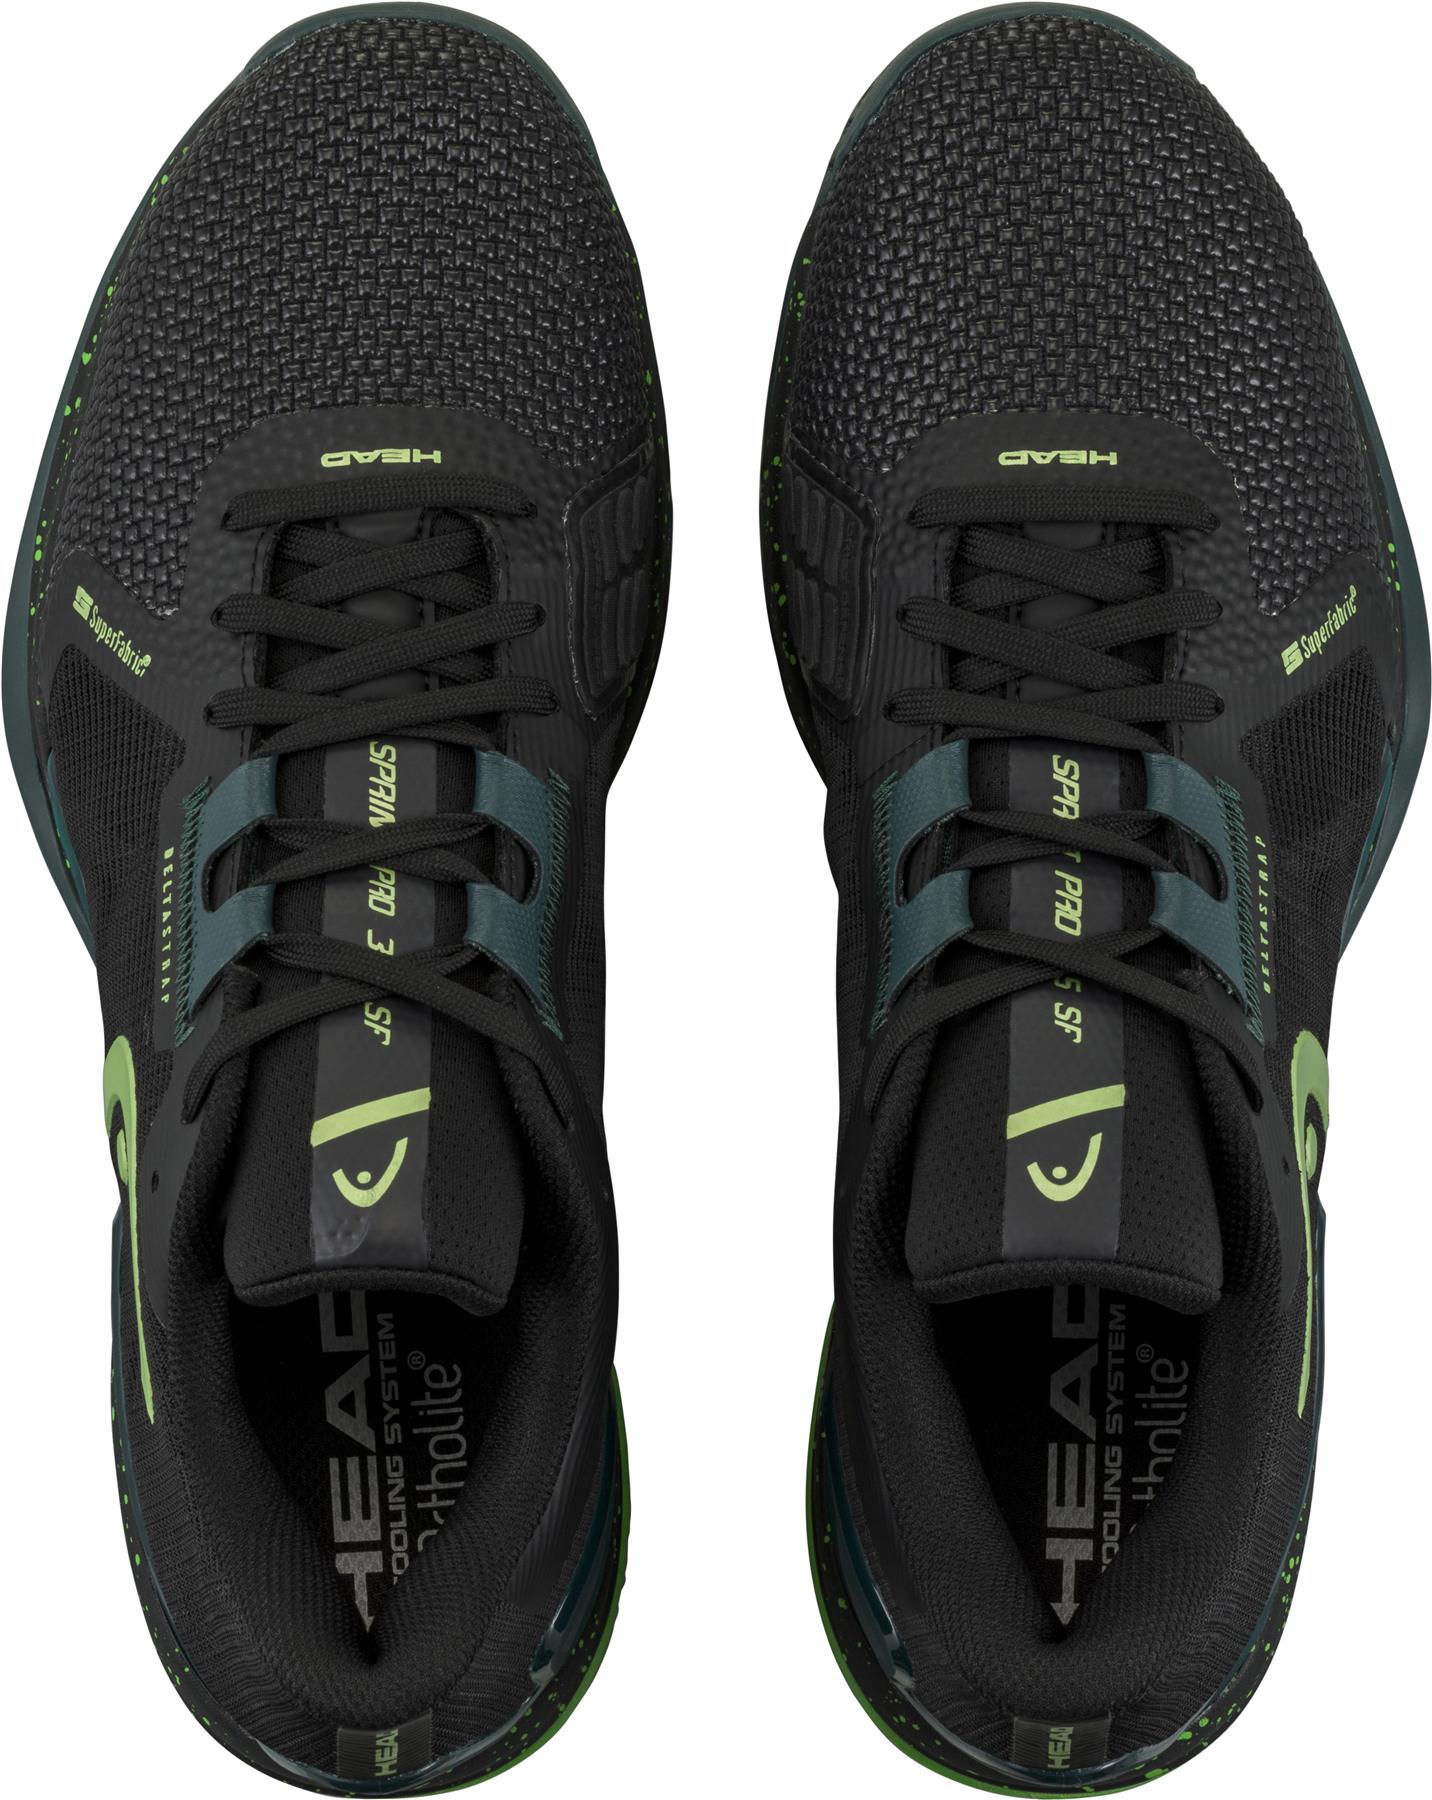 HEAD Sprint Pro SF Mens Tennis Shoes - Black / Forest Green - Top